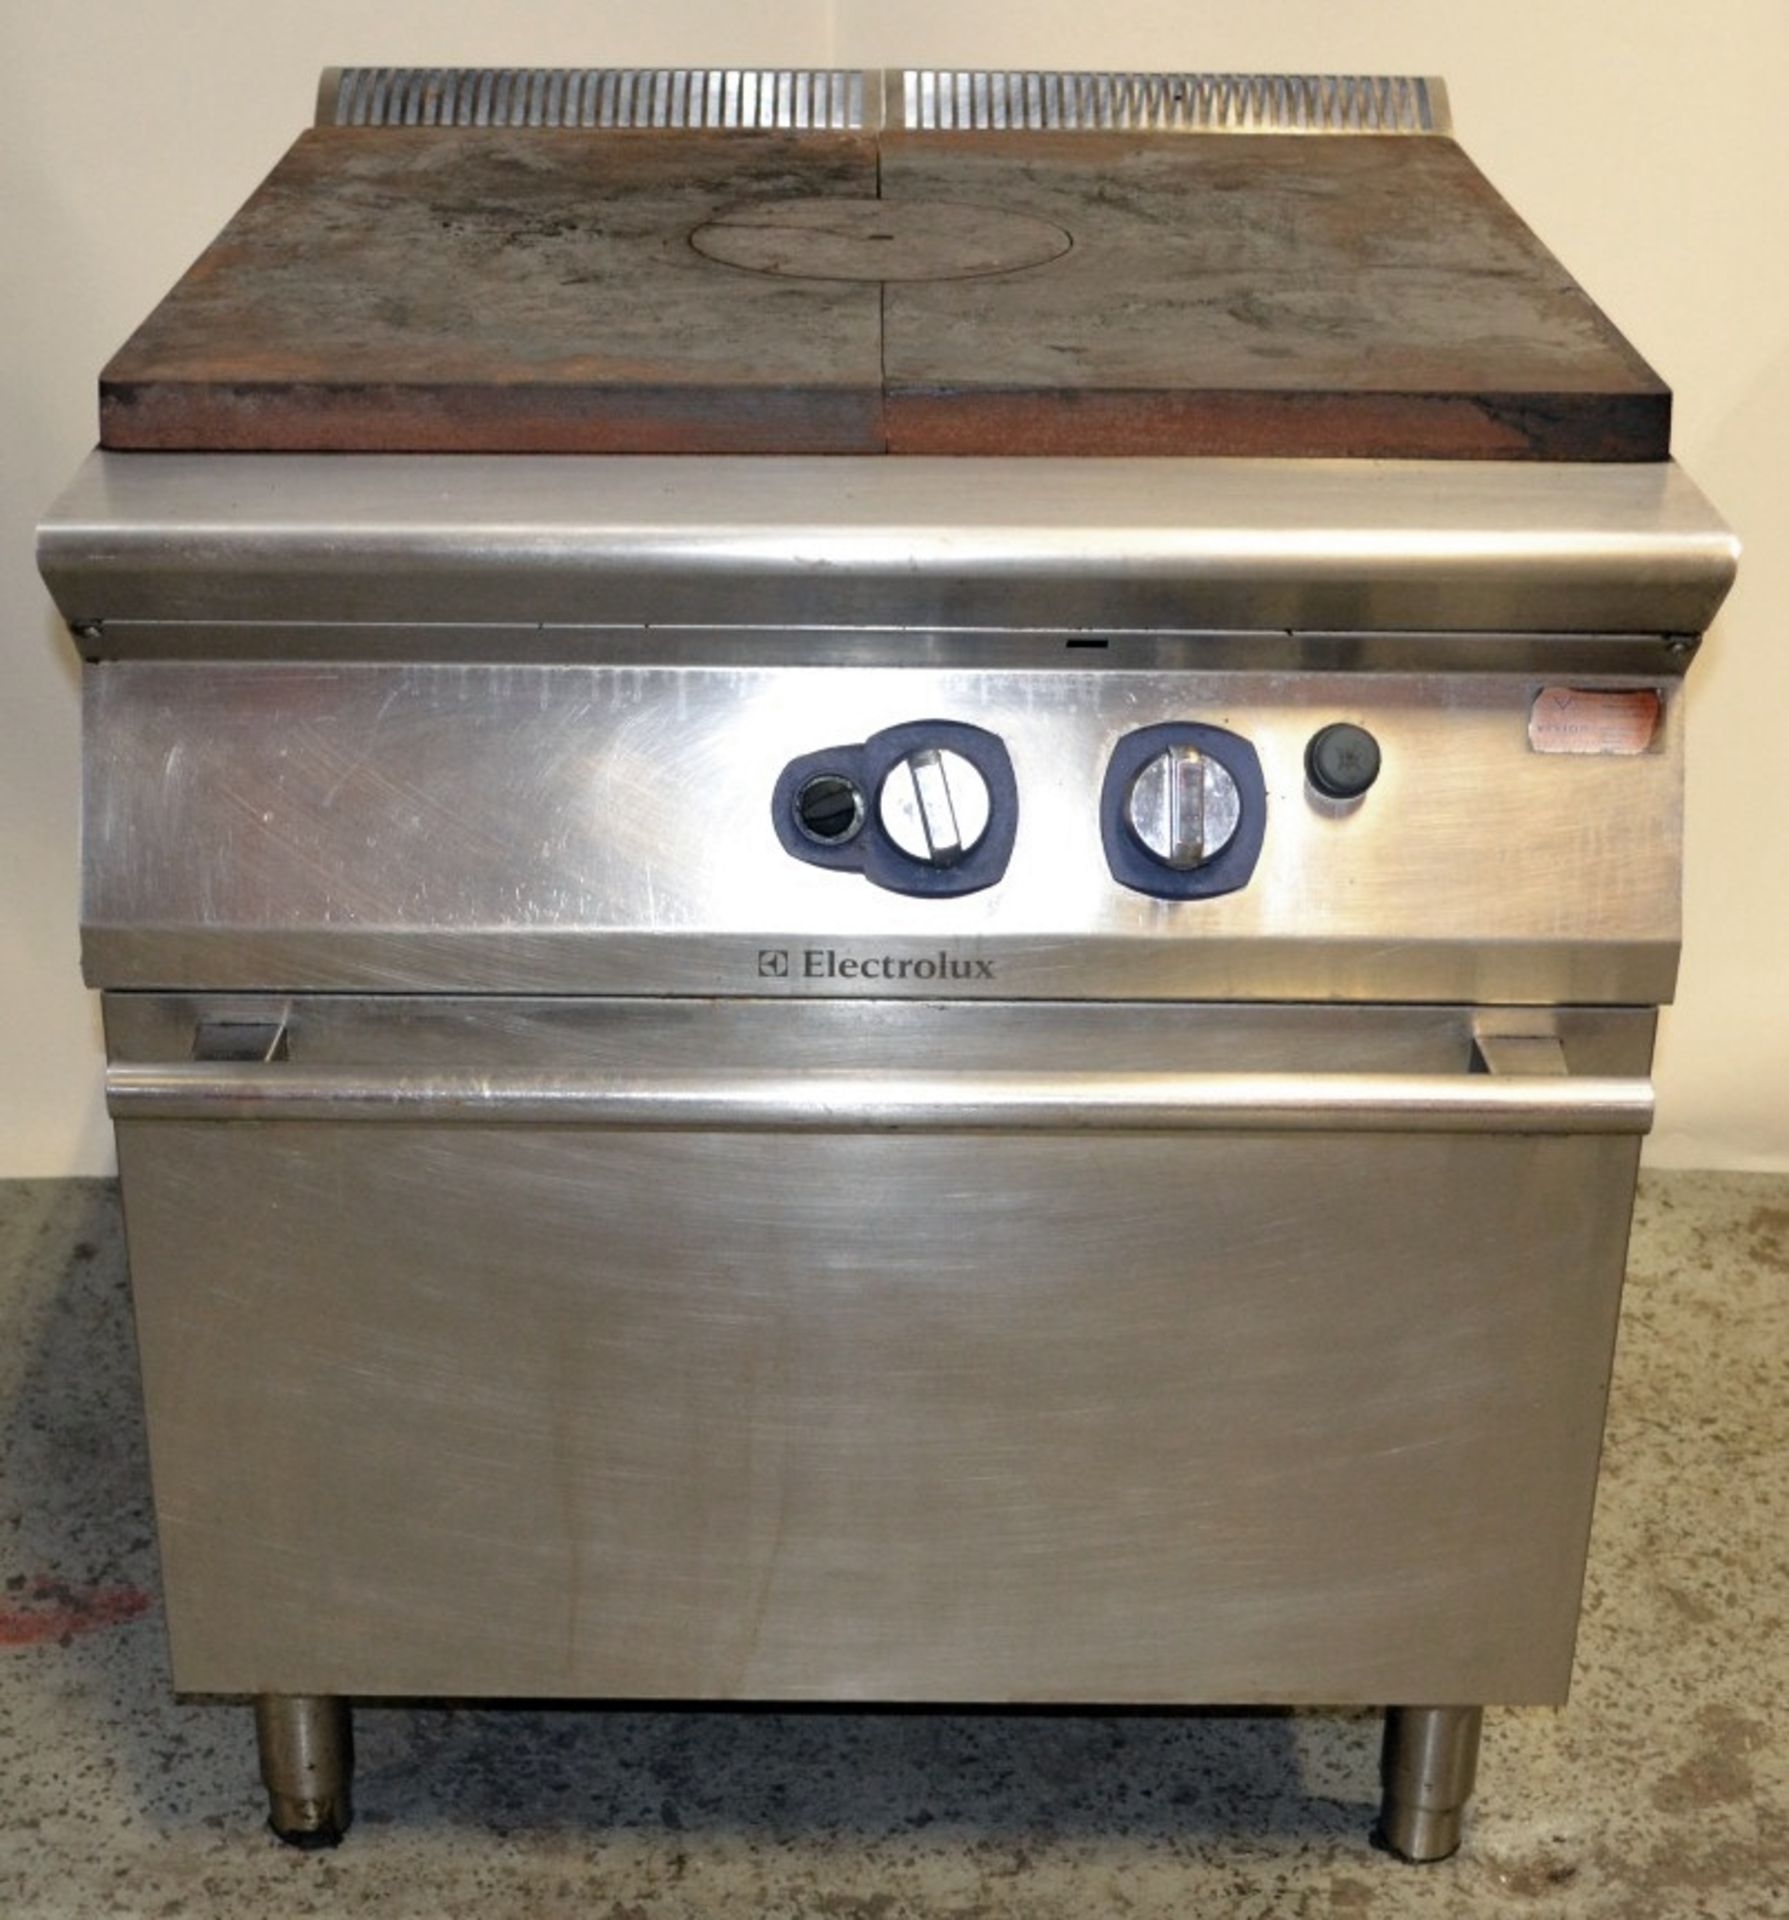 1 x Electrolux Commercial Stainless Steel Solid Top Oven With A Durable Cast-iron Cooking - Image 2 of 11